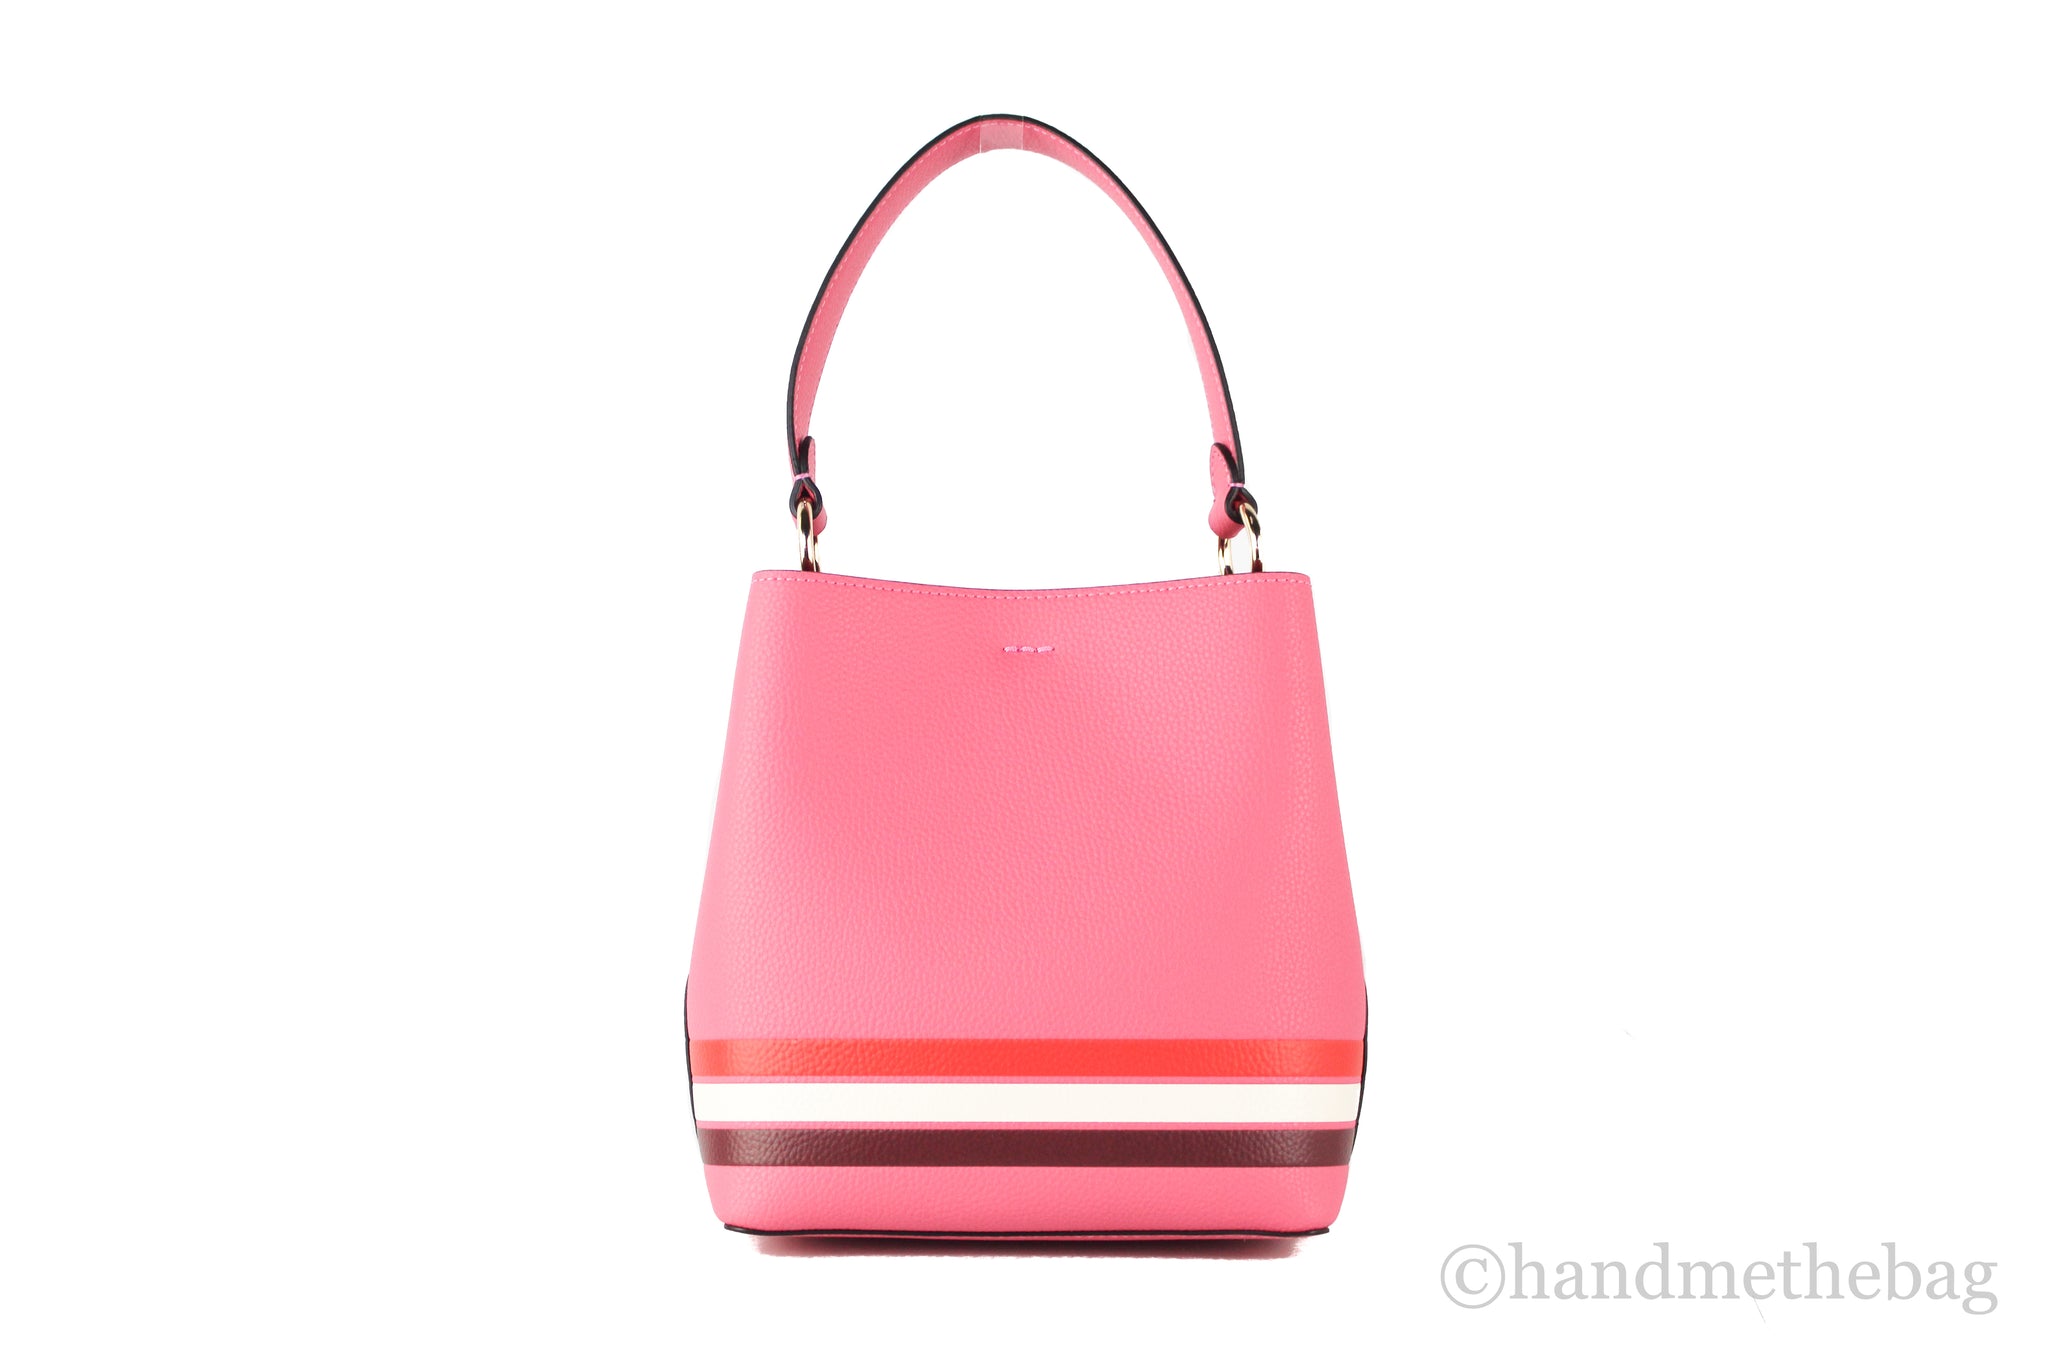 DKNY Bryant Park Mini Leather Backpack in Pink